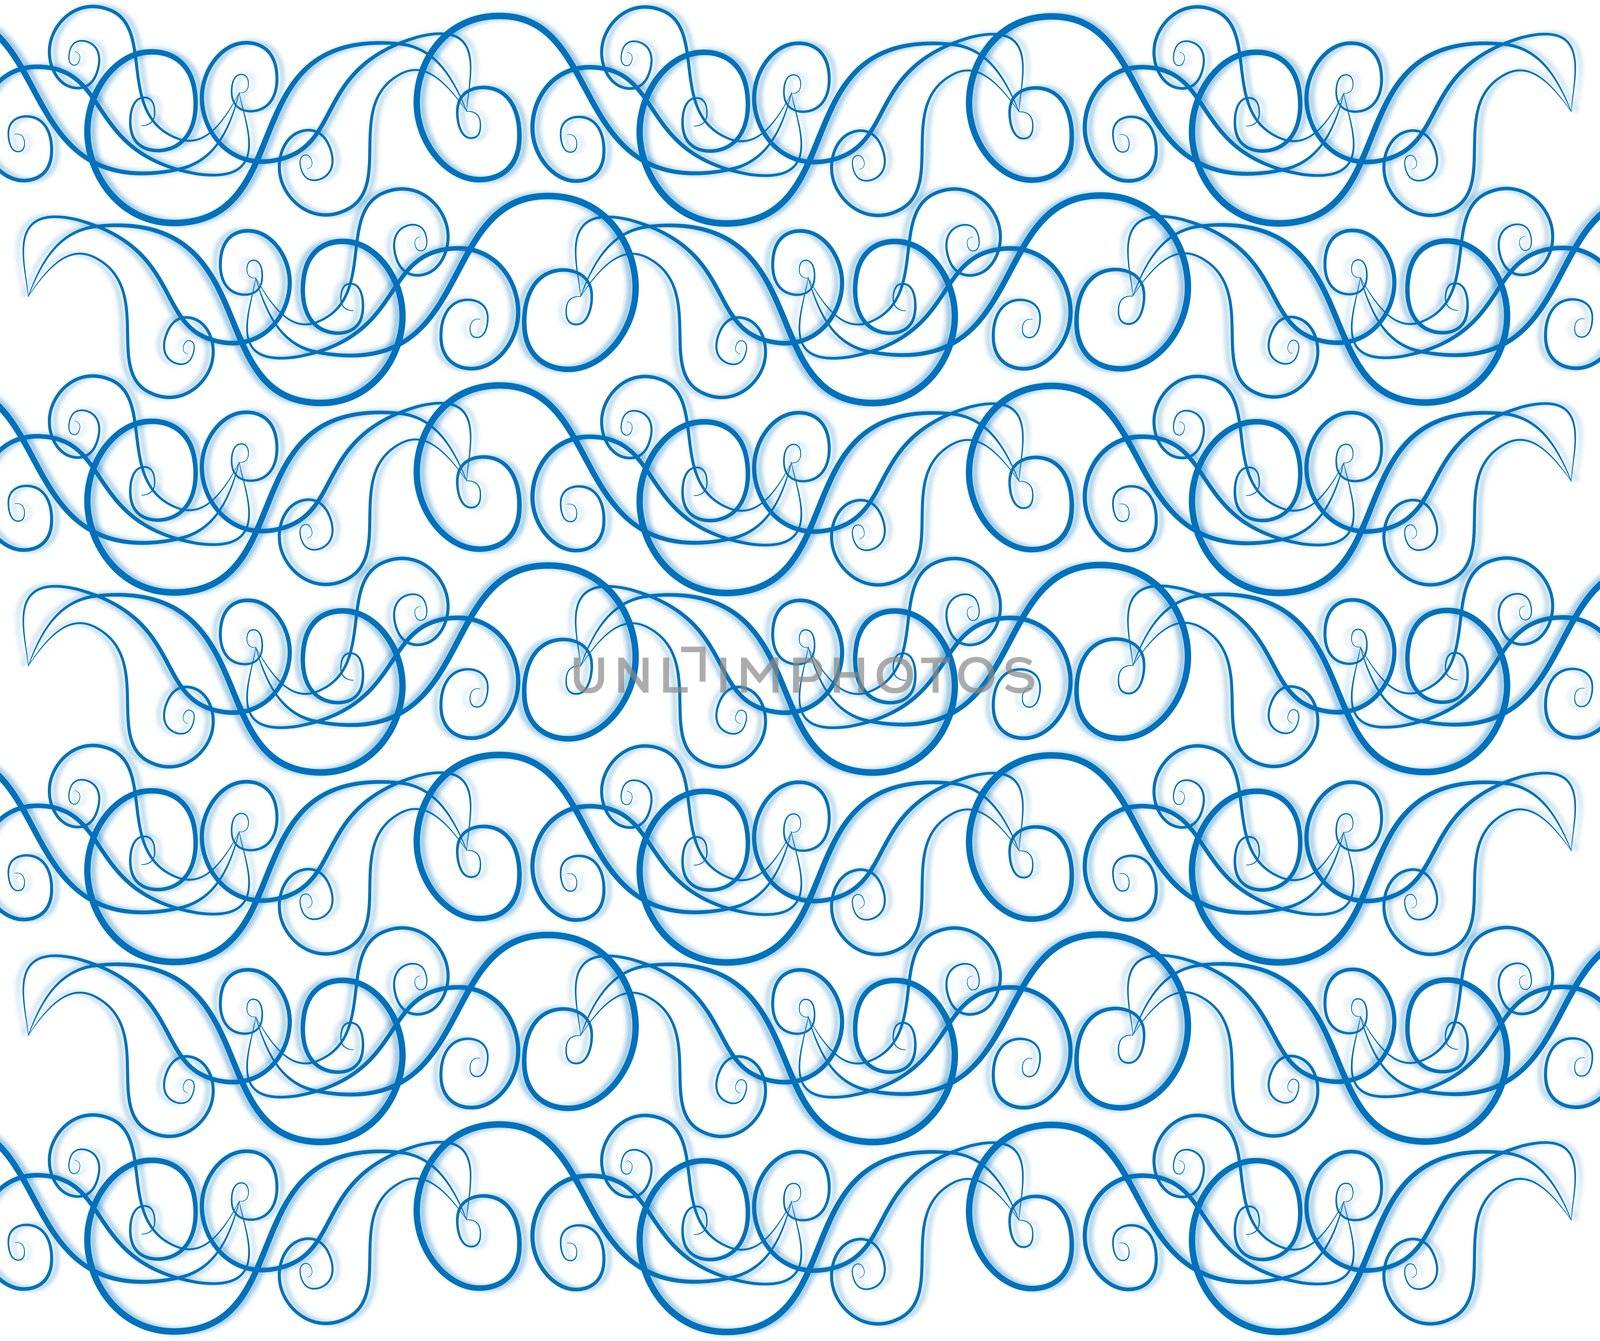 blue texture or background with a regular spiral pattern